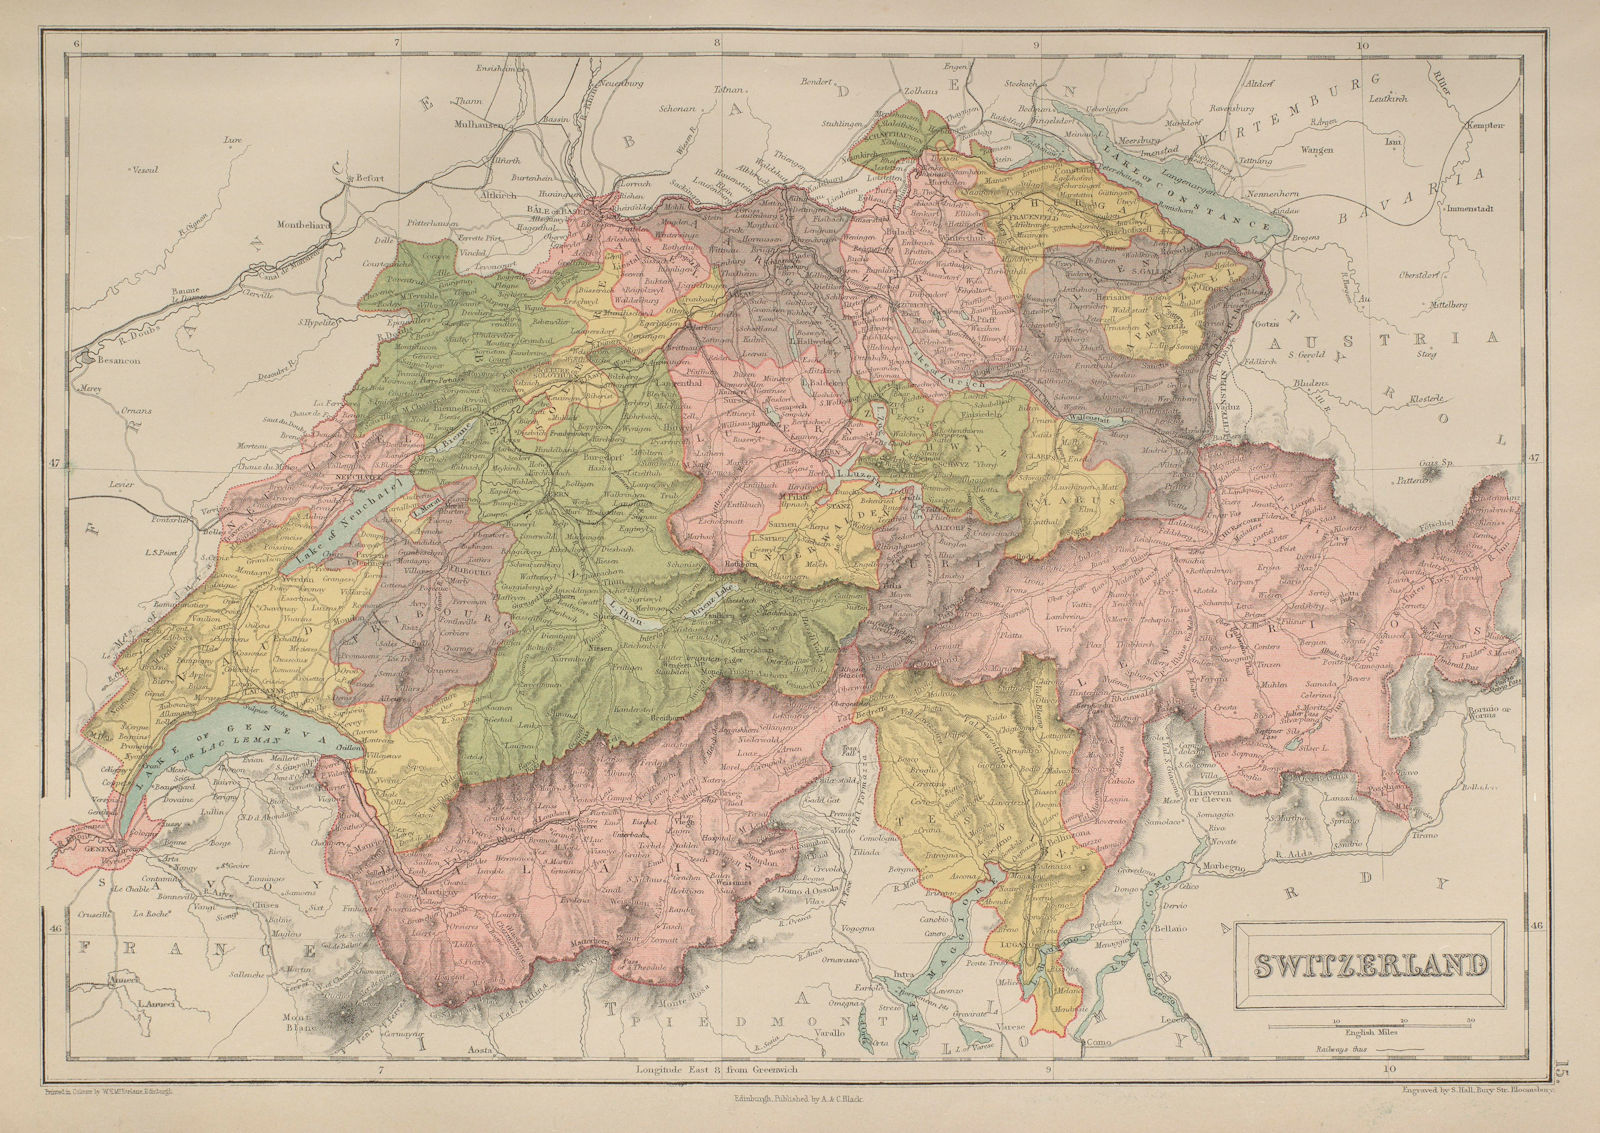 Associate Product Switzerland in Cantons. BARTHOLOMEW 1870 old antique vintage map plan chart